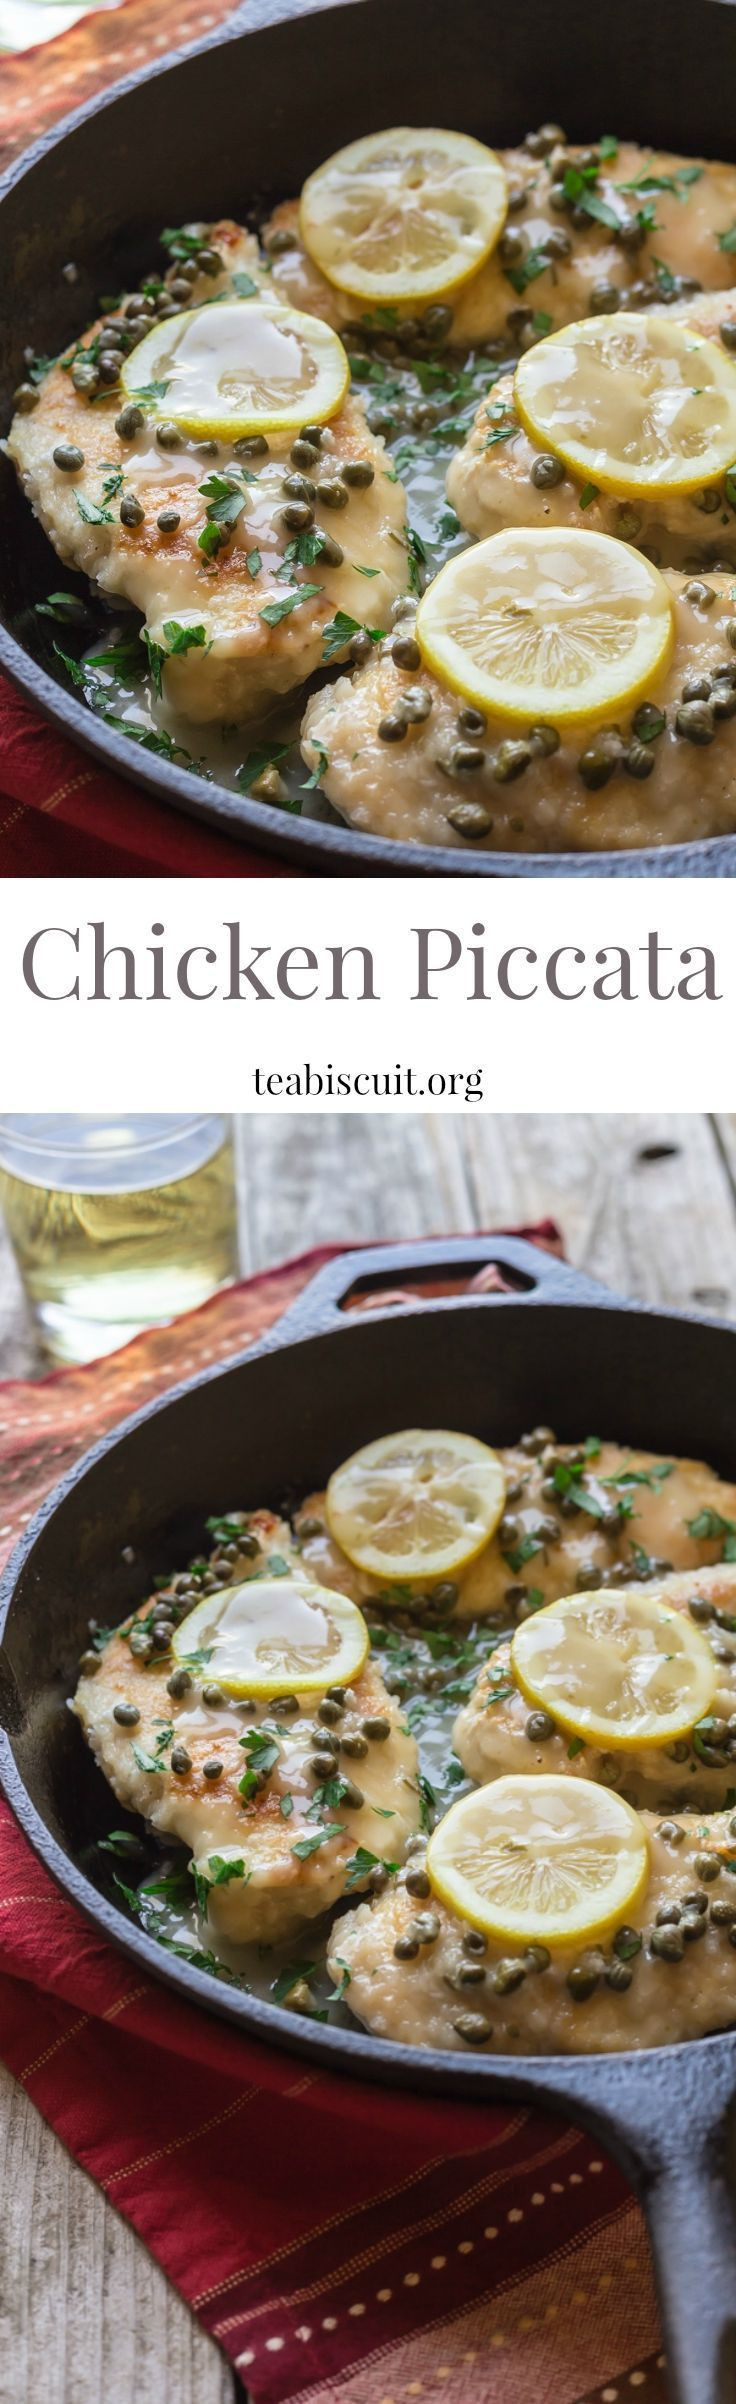 Low Calorie Paleo Recipes
 Easy Weeknight Chicken Piccata ready in less than 30